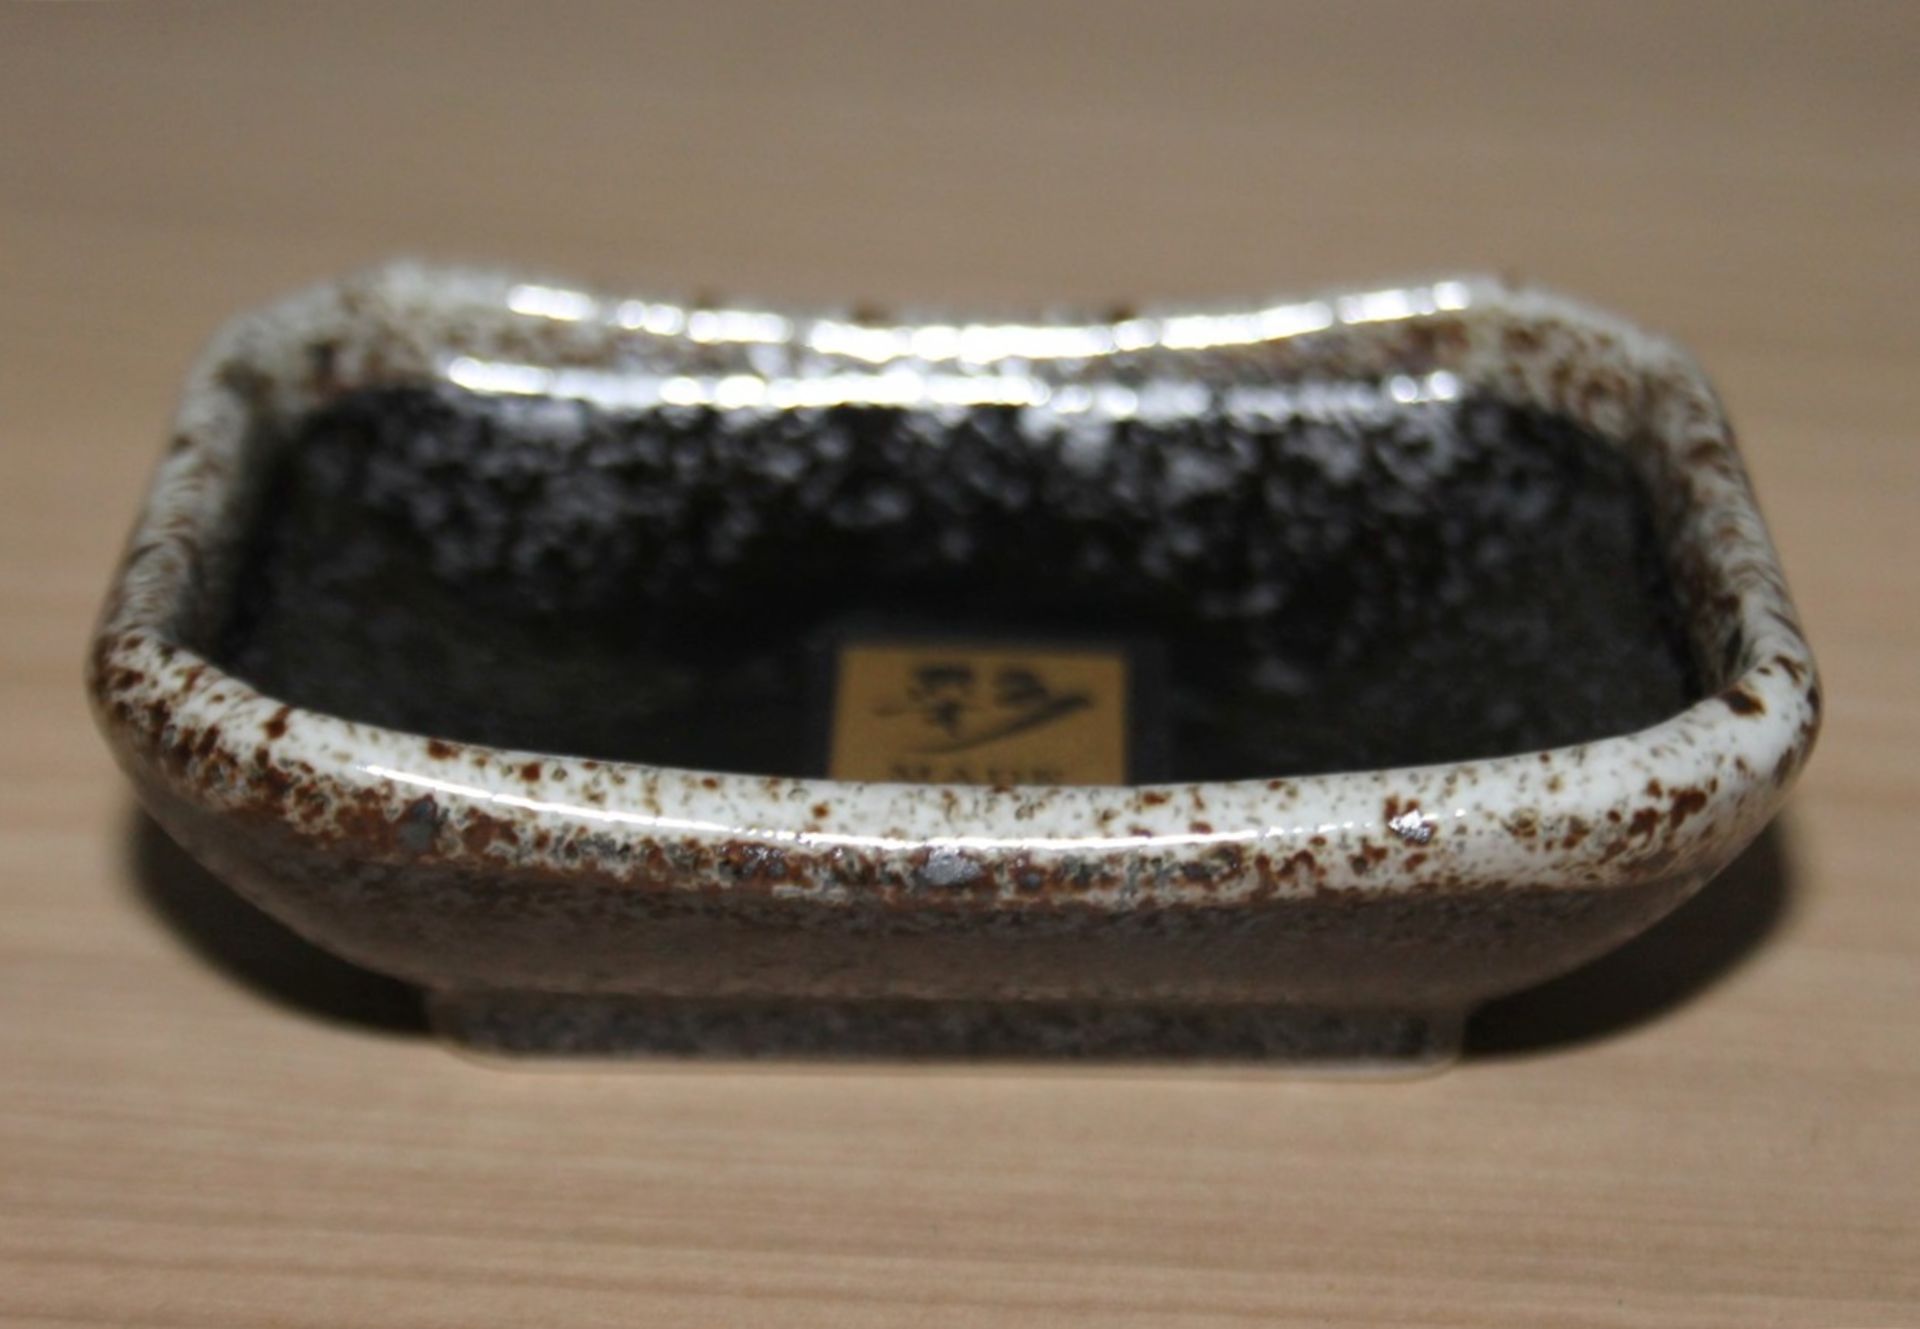 68 x Japanese Commercial Ceramic Finger / Dipping Dishes - Dimensions: H2.5 x W9 x D6.5cm Recently - Image 5 of 6